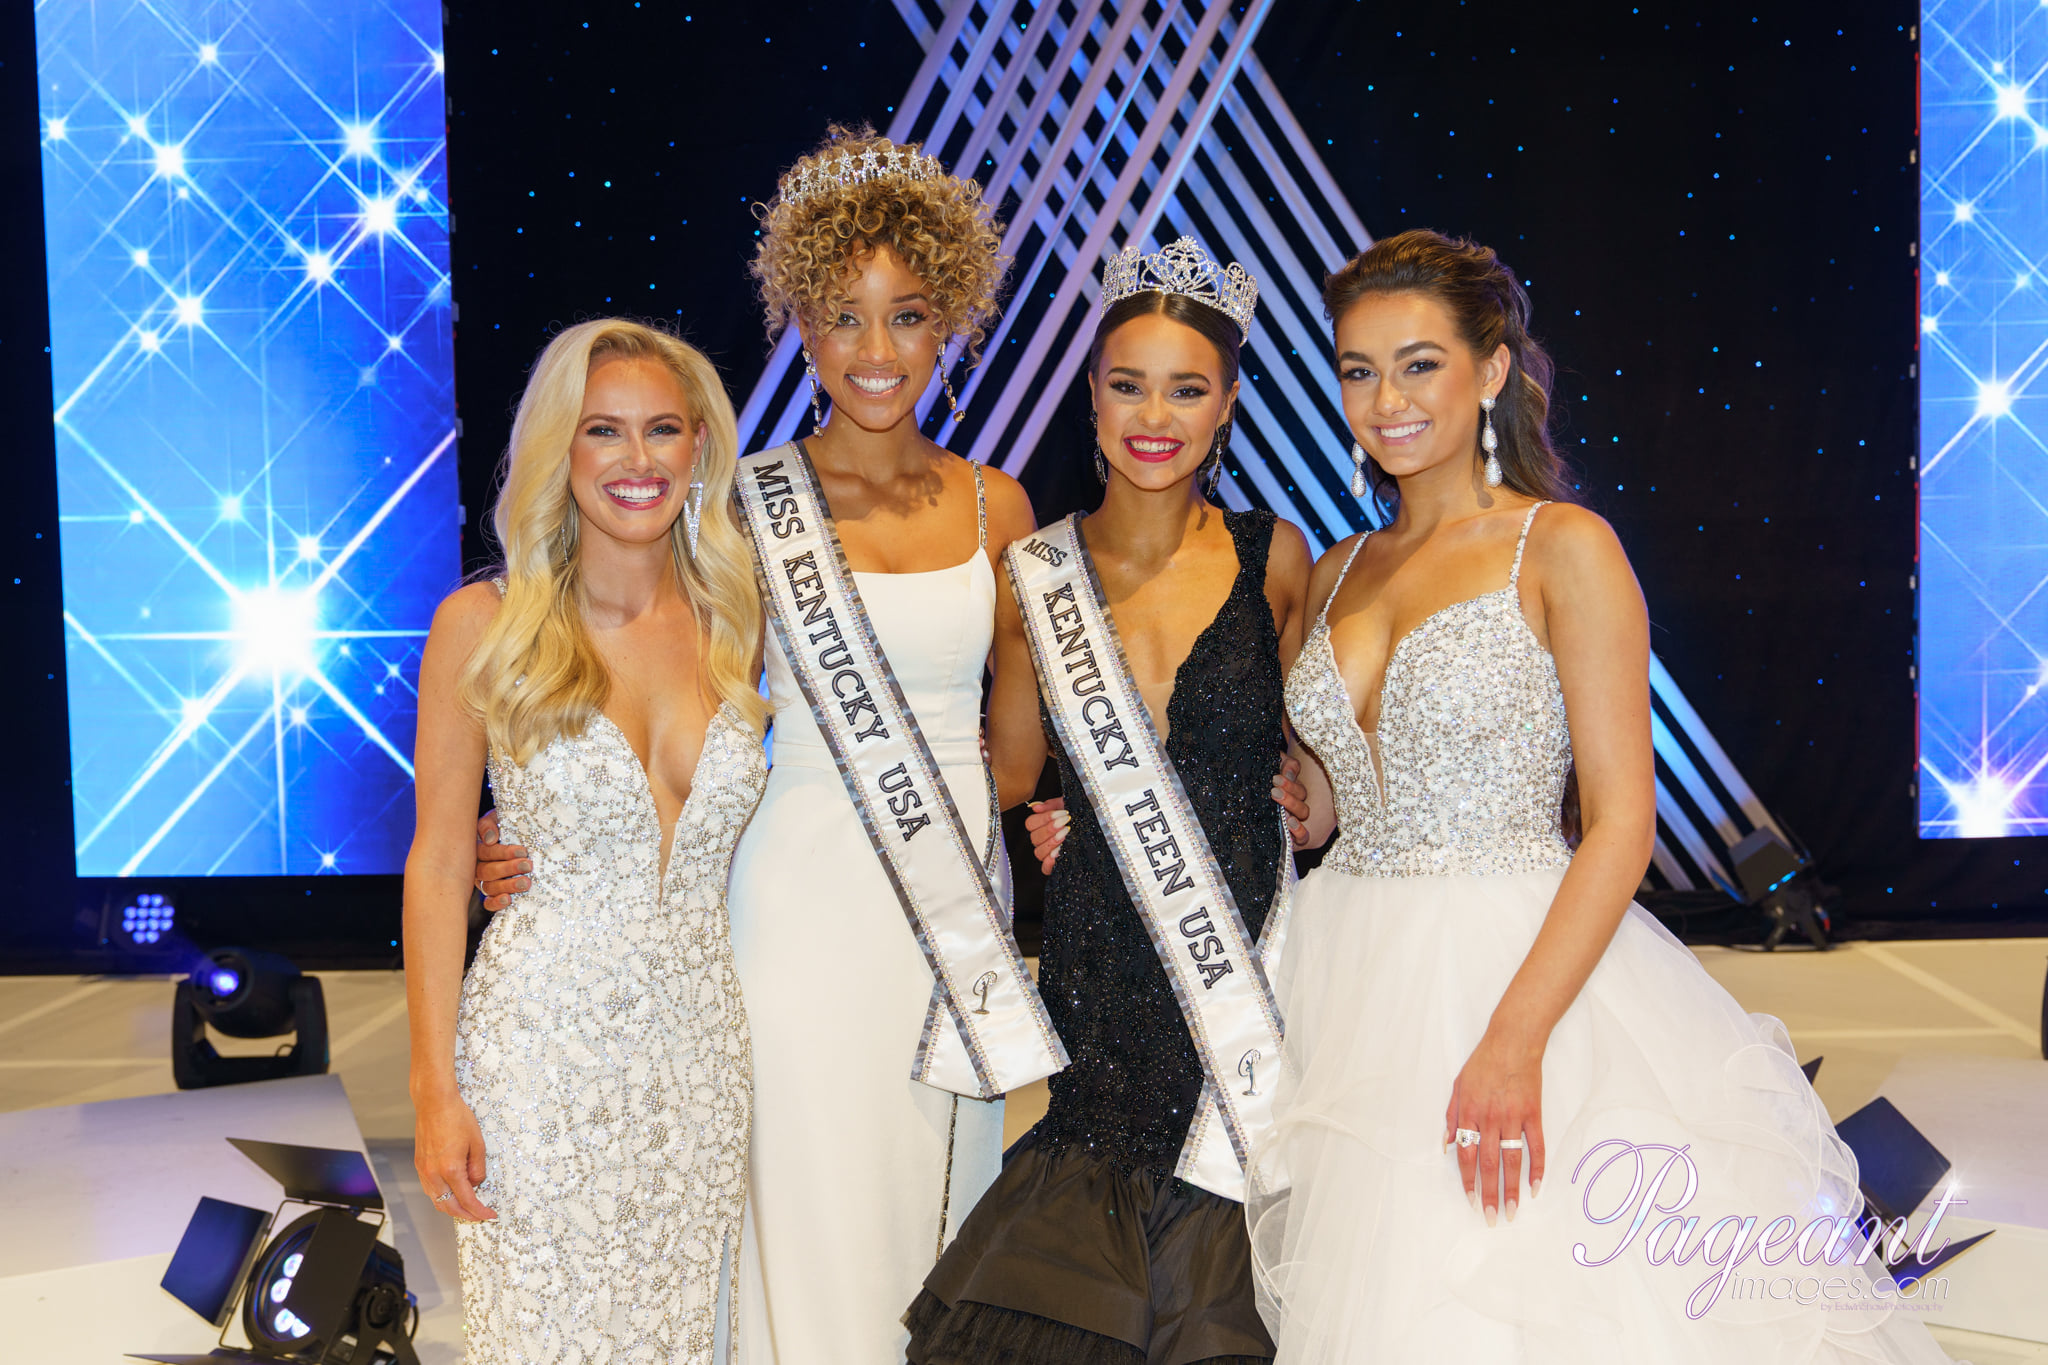 Miss KY USA 2020 Lexie Iles, Miss KY USA 2021 Elle Smith (soon to be crowned Miss USA), Miss KY Teen USA 2021 Kennedy Mosley & Miss KY USA 2020 Mattie Barker